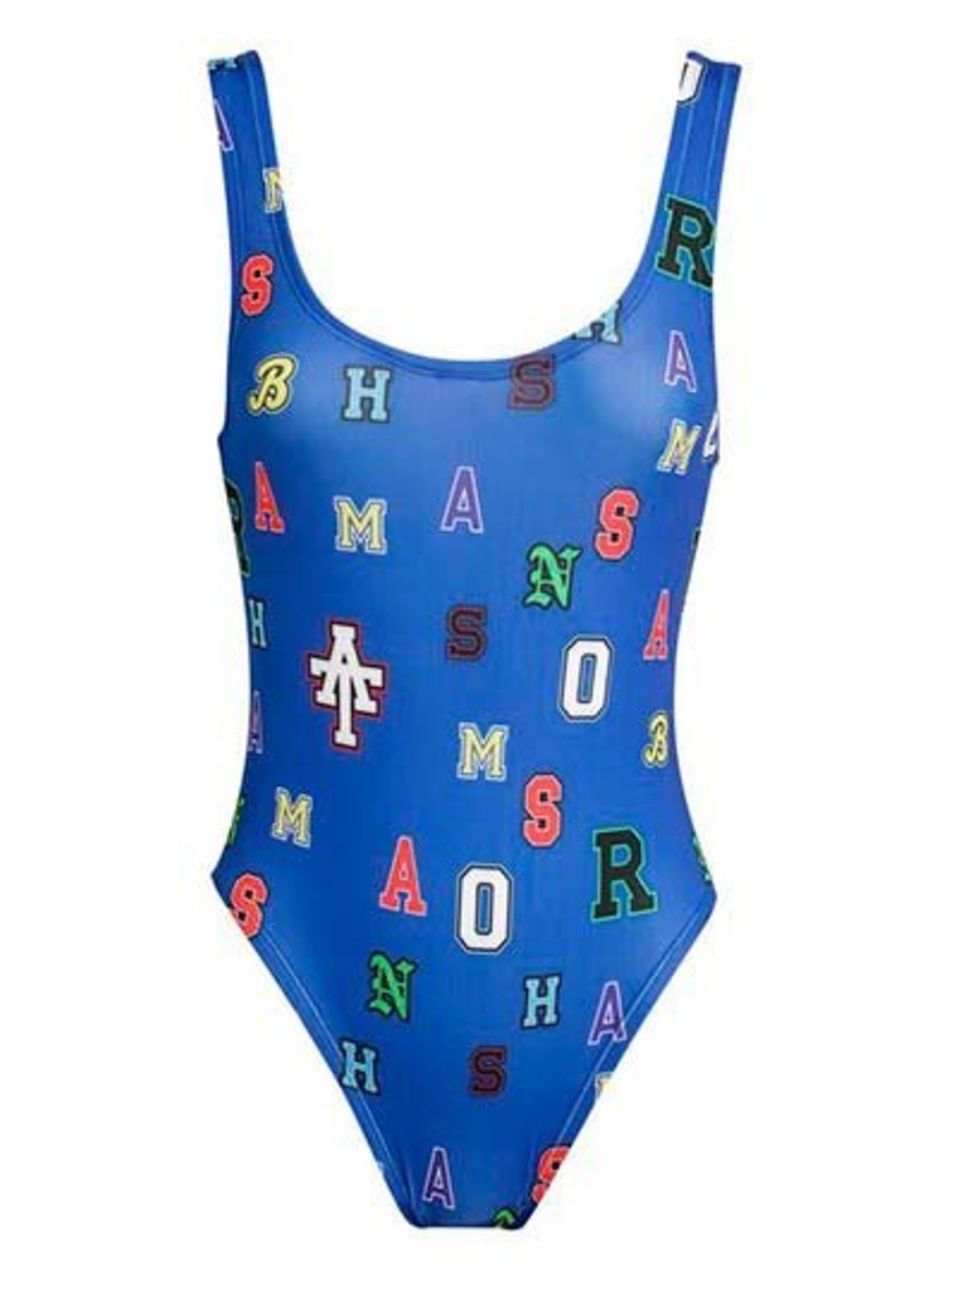 <p>Spell it out with this Abrahamsson swimsuit, £95 at <a href="http://www.brownsfashion.com/product/03A625740002/046/abrahamsson-logo-body">Browns</a>.</p>